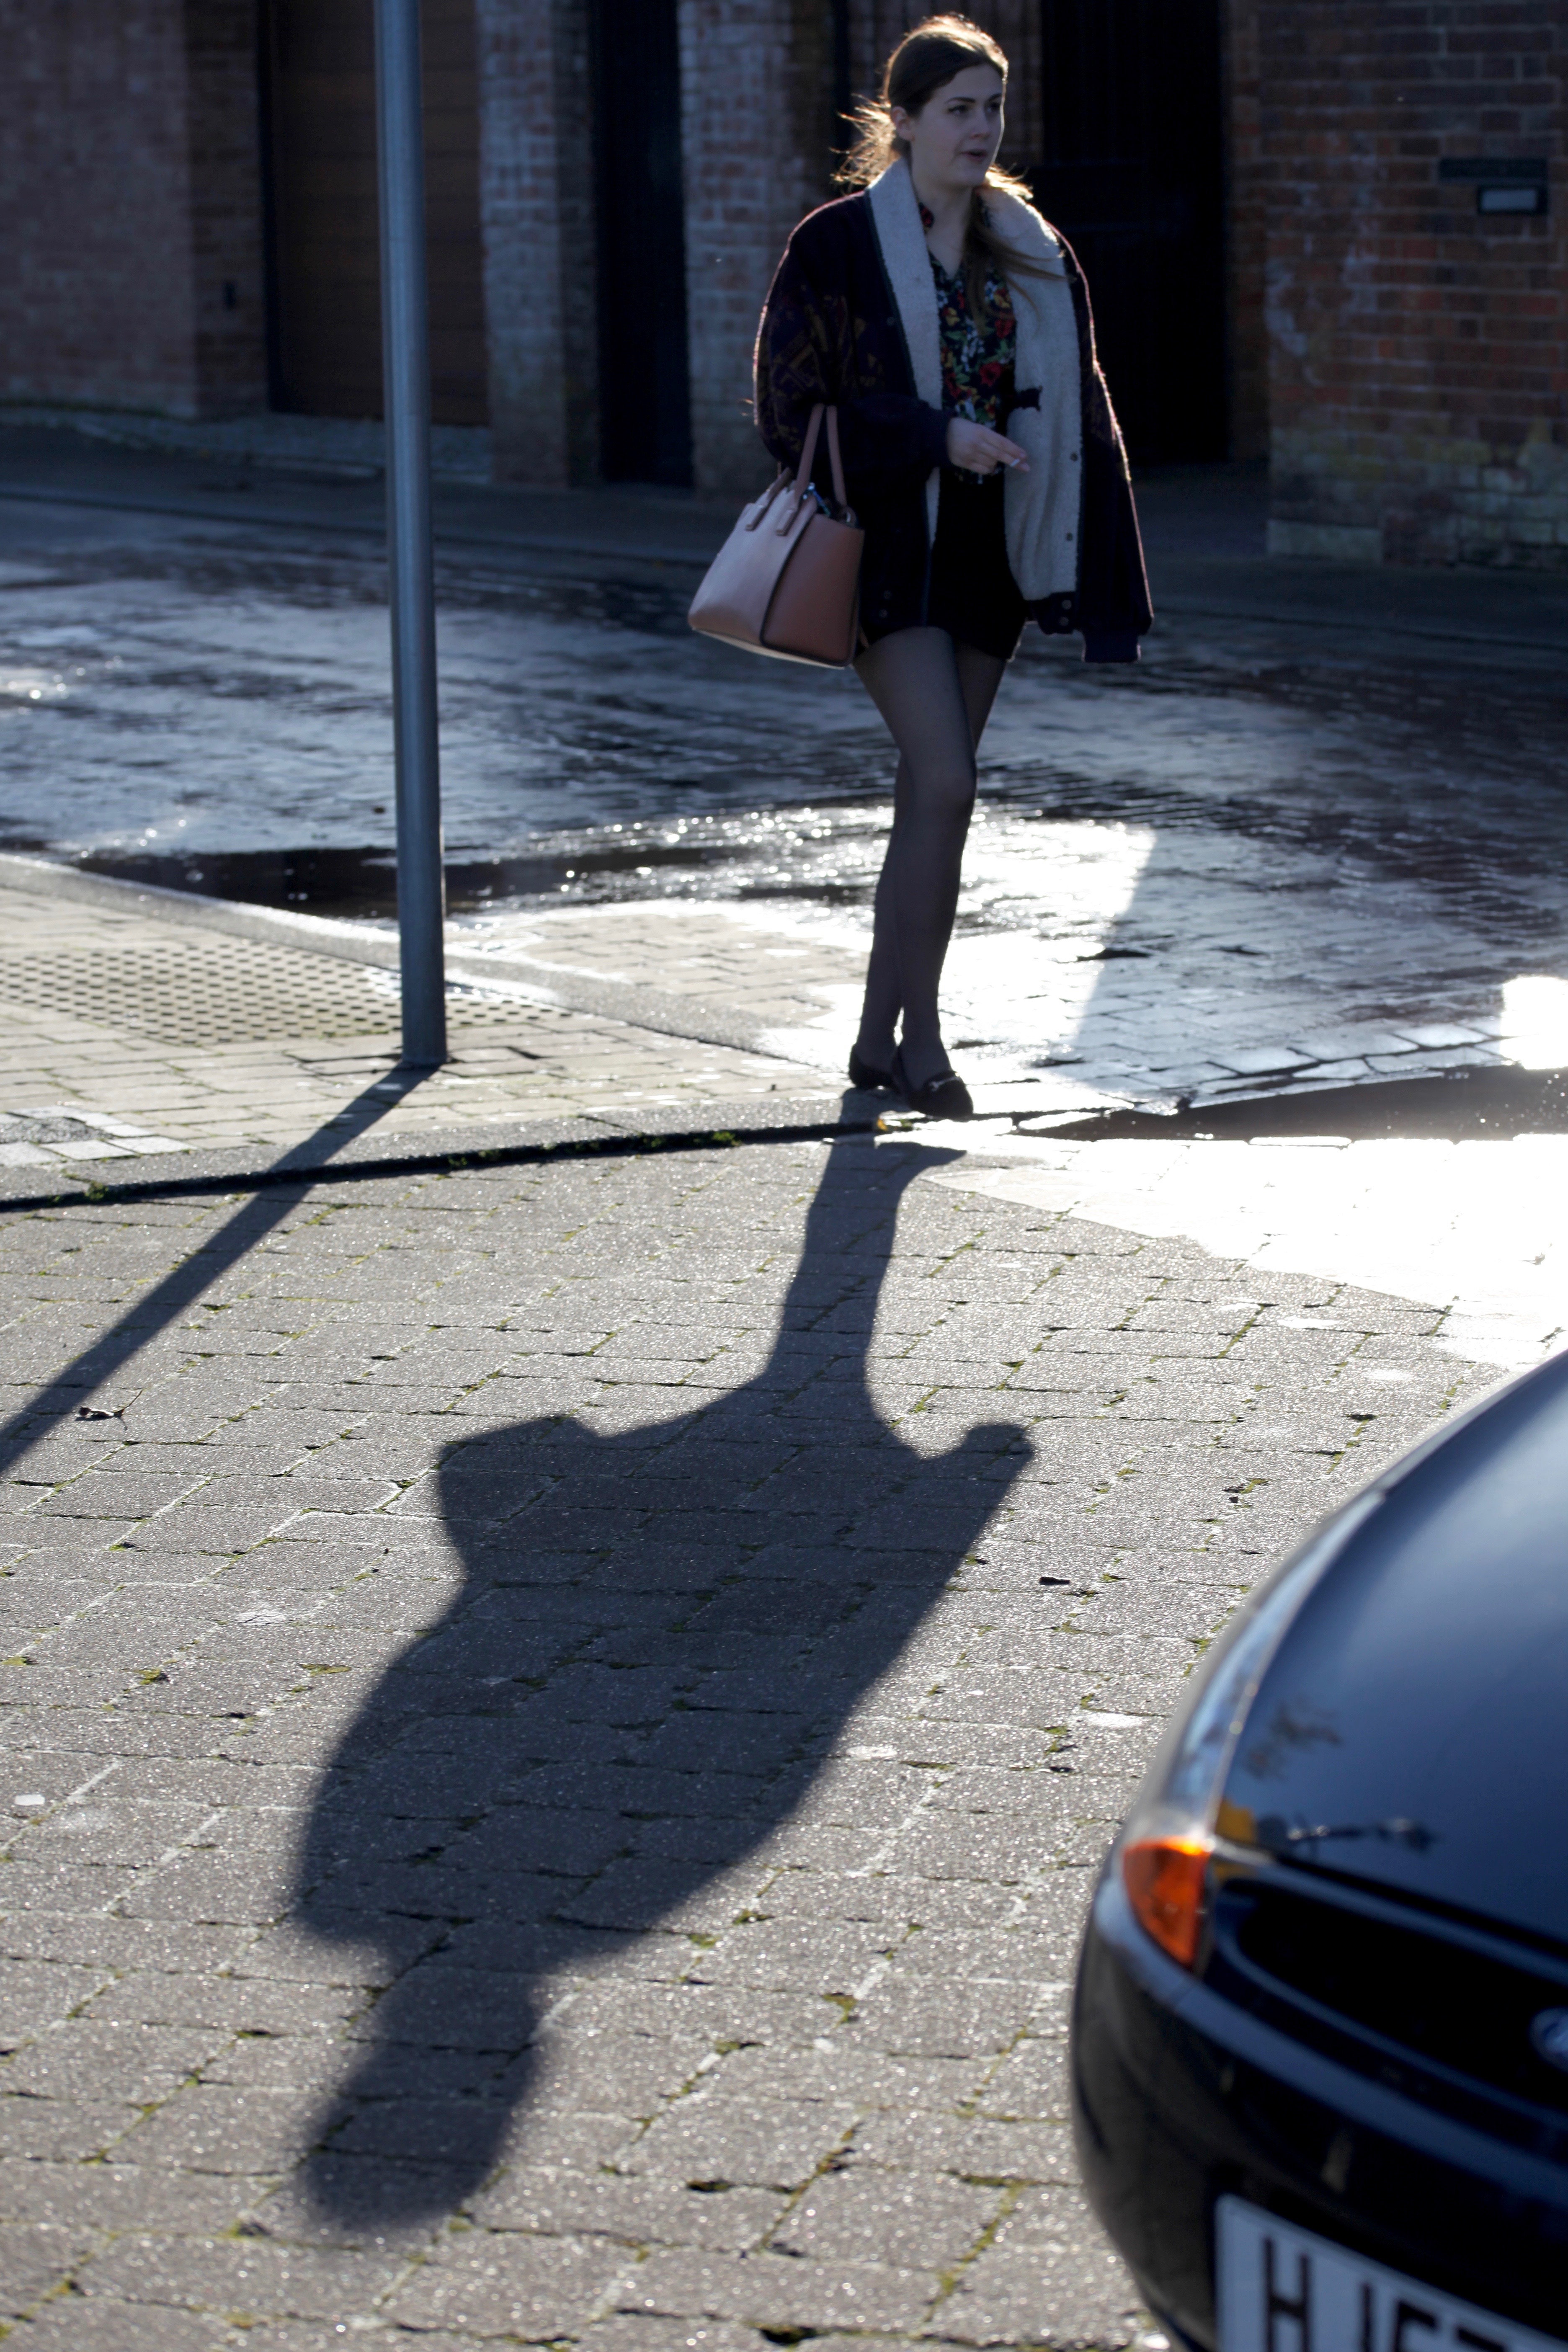 Shadow of young woman